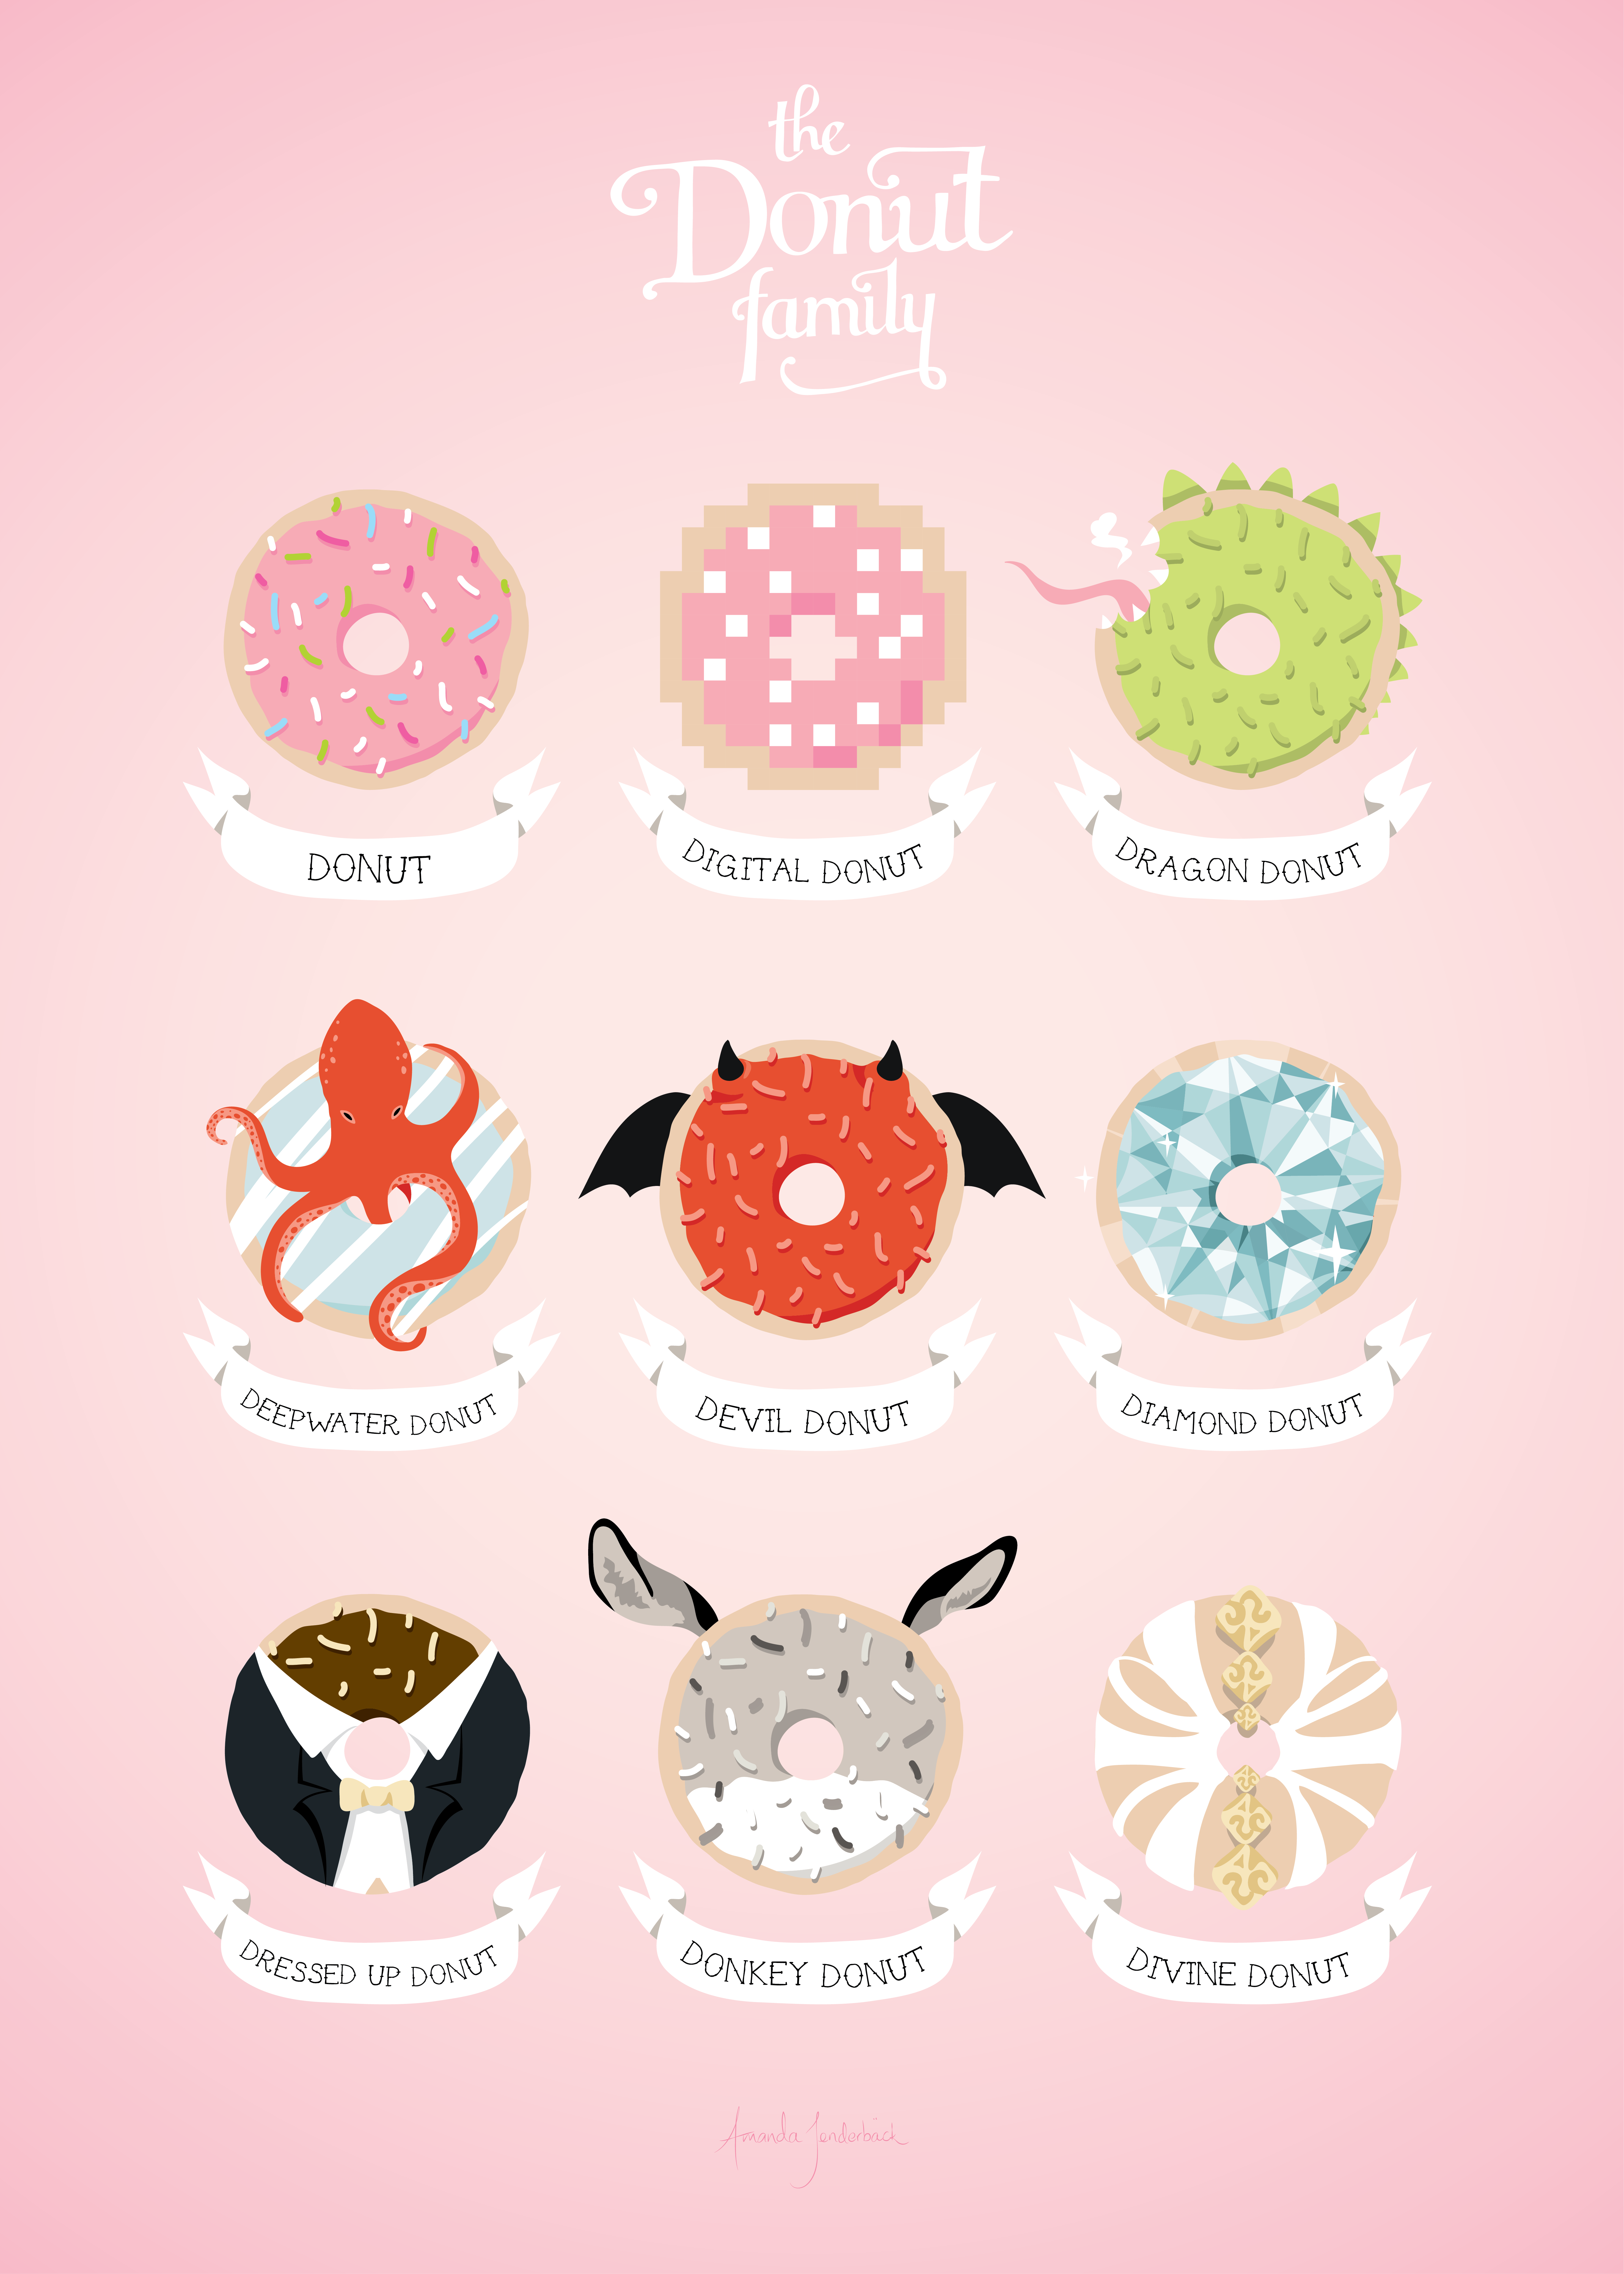 The family by amanda. Donut clipart word